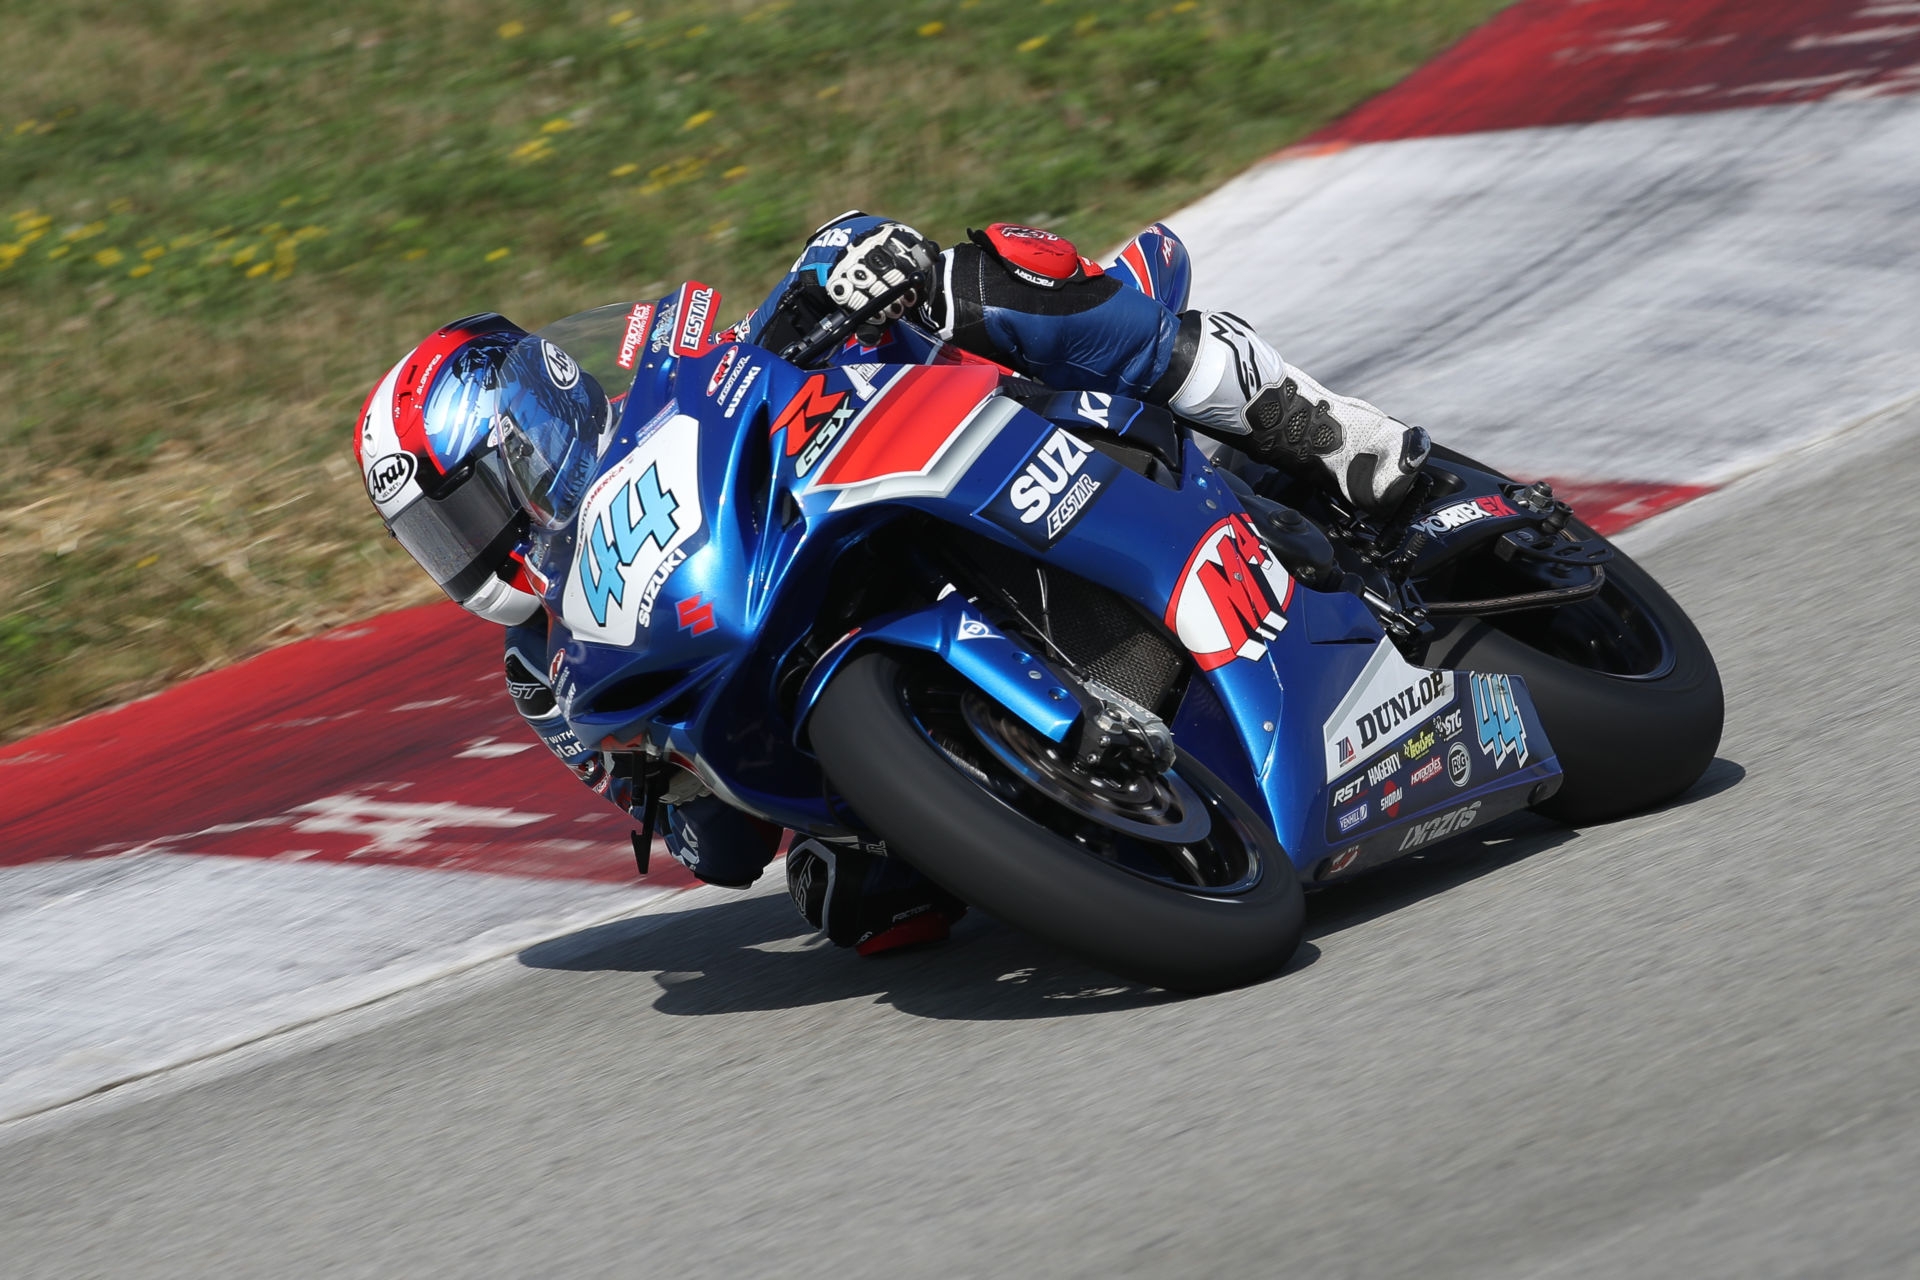 Sam Lochoff (44) rode a strong race and delivered two top-five finishes in Pittsburgh, PA. Photo by Brian J. Nelson, courtesy Suzuki Motor USA, LLC.